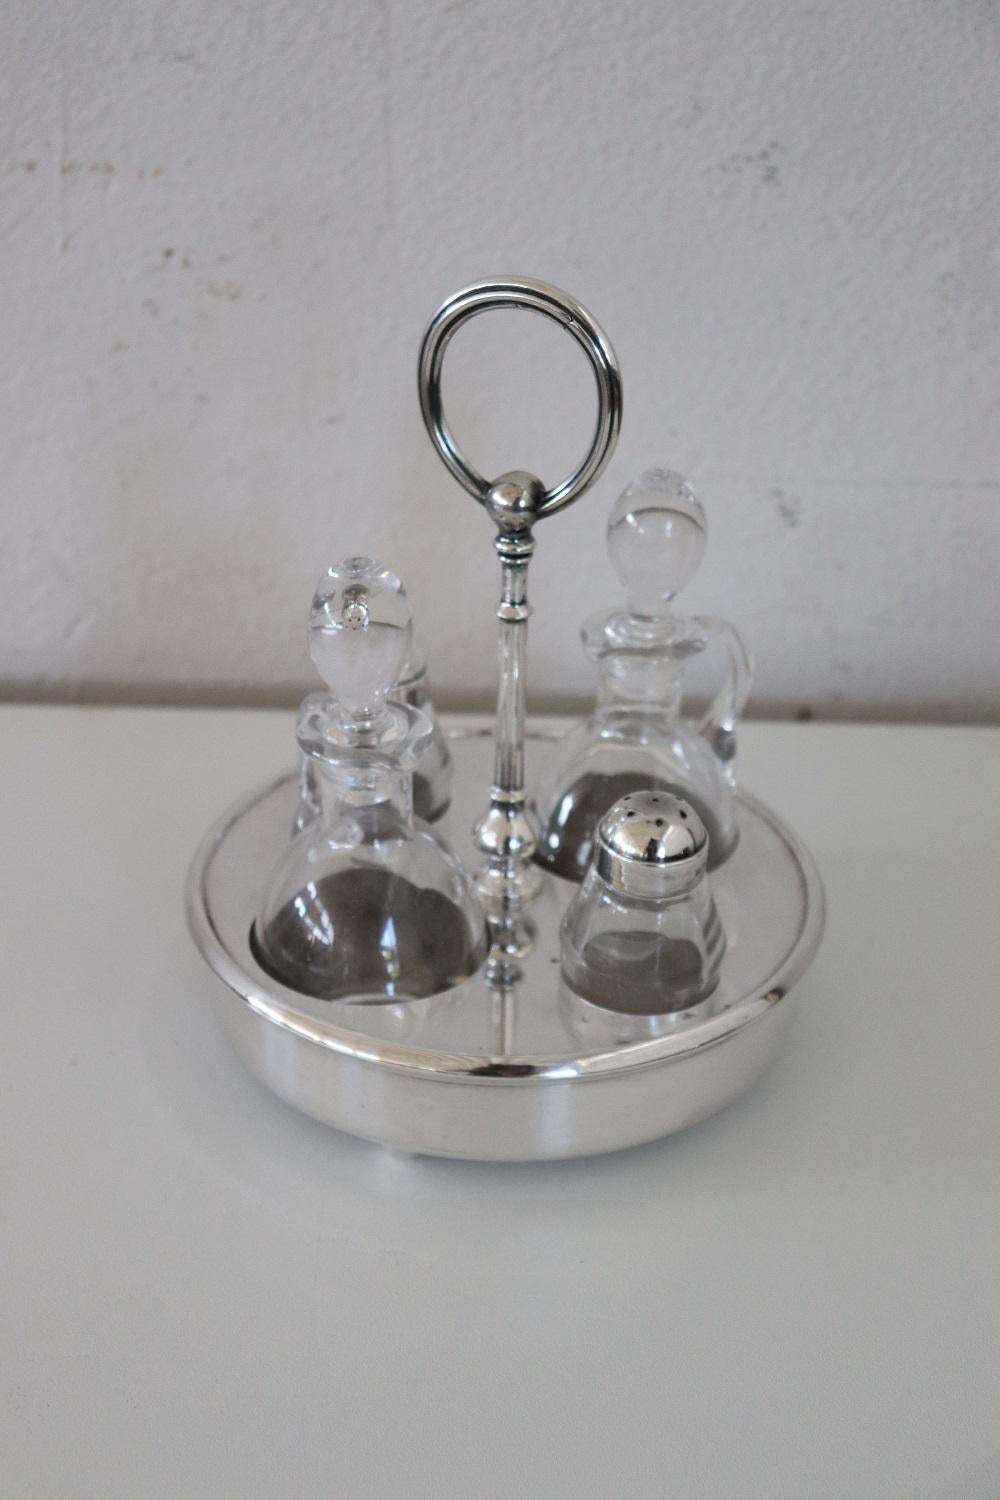 Beautiful silver plate condiments set consisting of a salt holder, a pepper holder, a bottle for oil and a bottle for vinegar. Mark Fleuron, Christofle France. Perfect for embellishing a table with class.